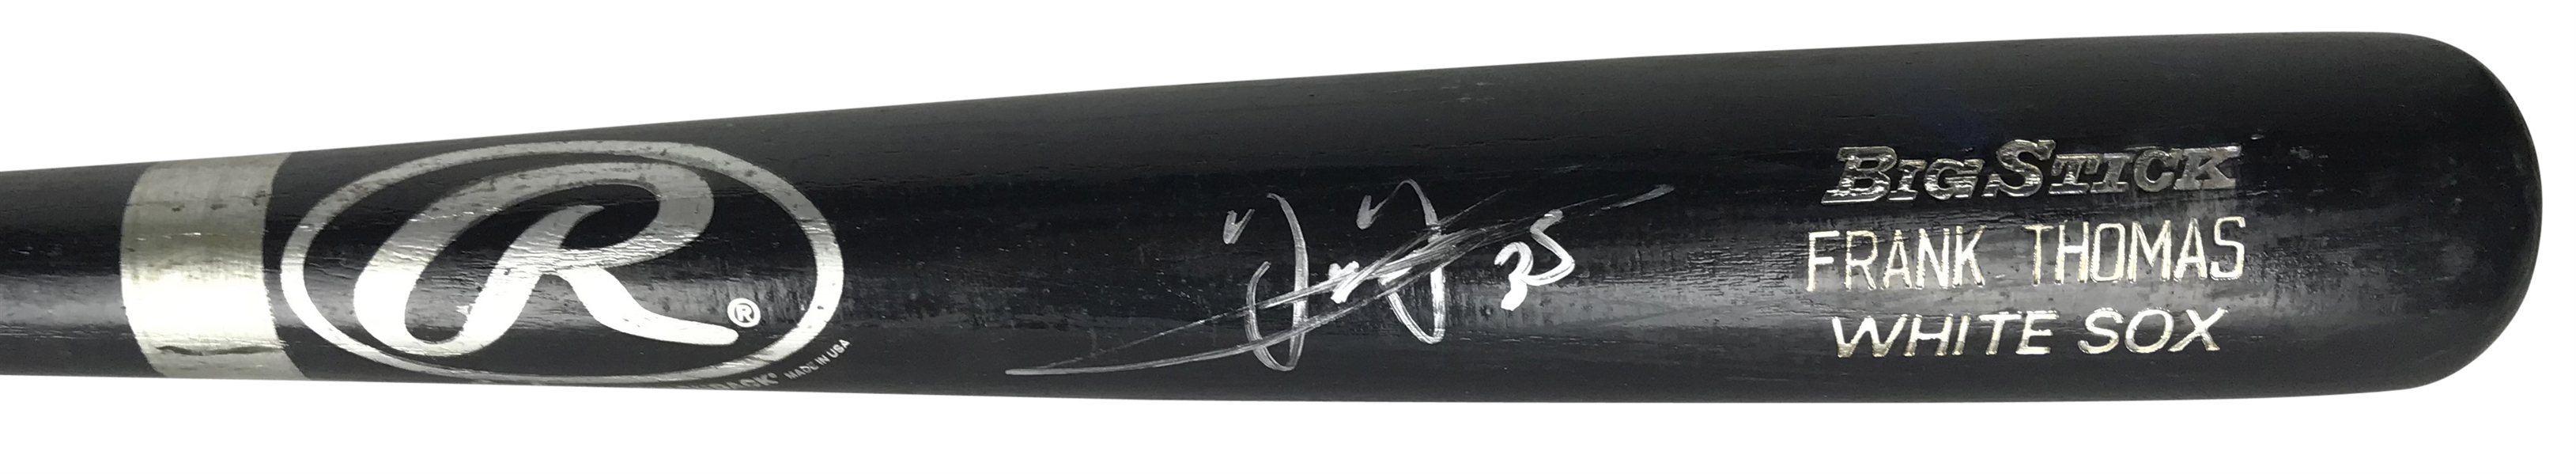 Frank Thomas Game Used & Signed 1999 White Sox 460B Baseball Bat MEARS Perfect A-10!